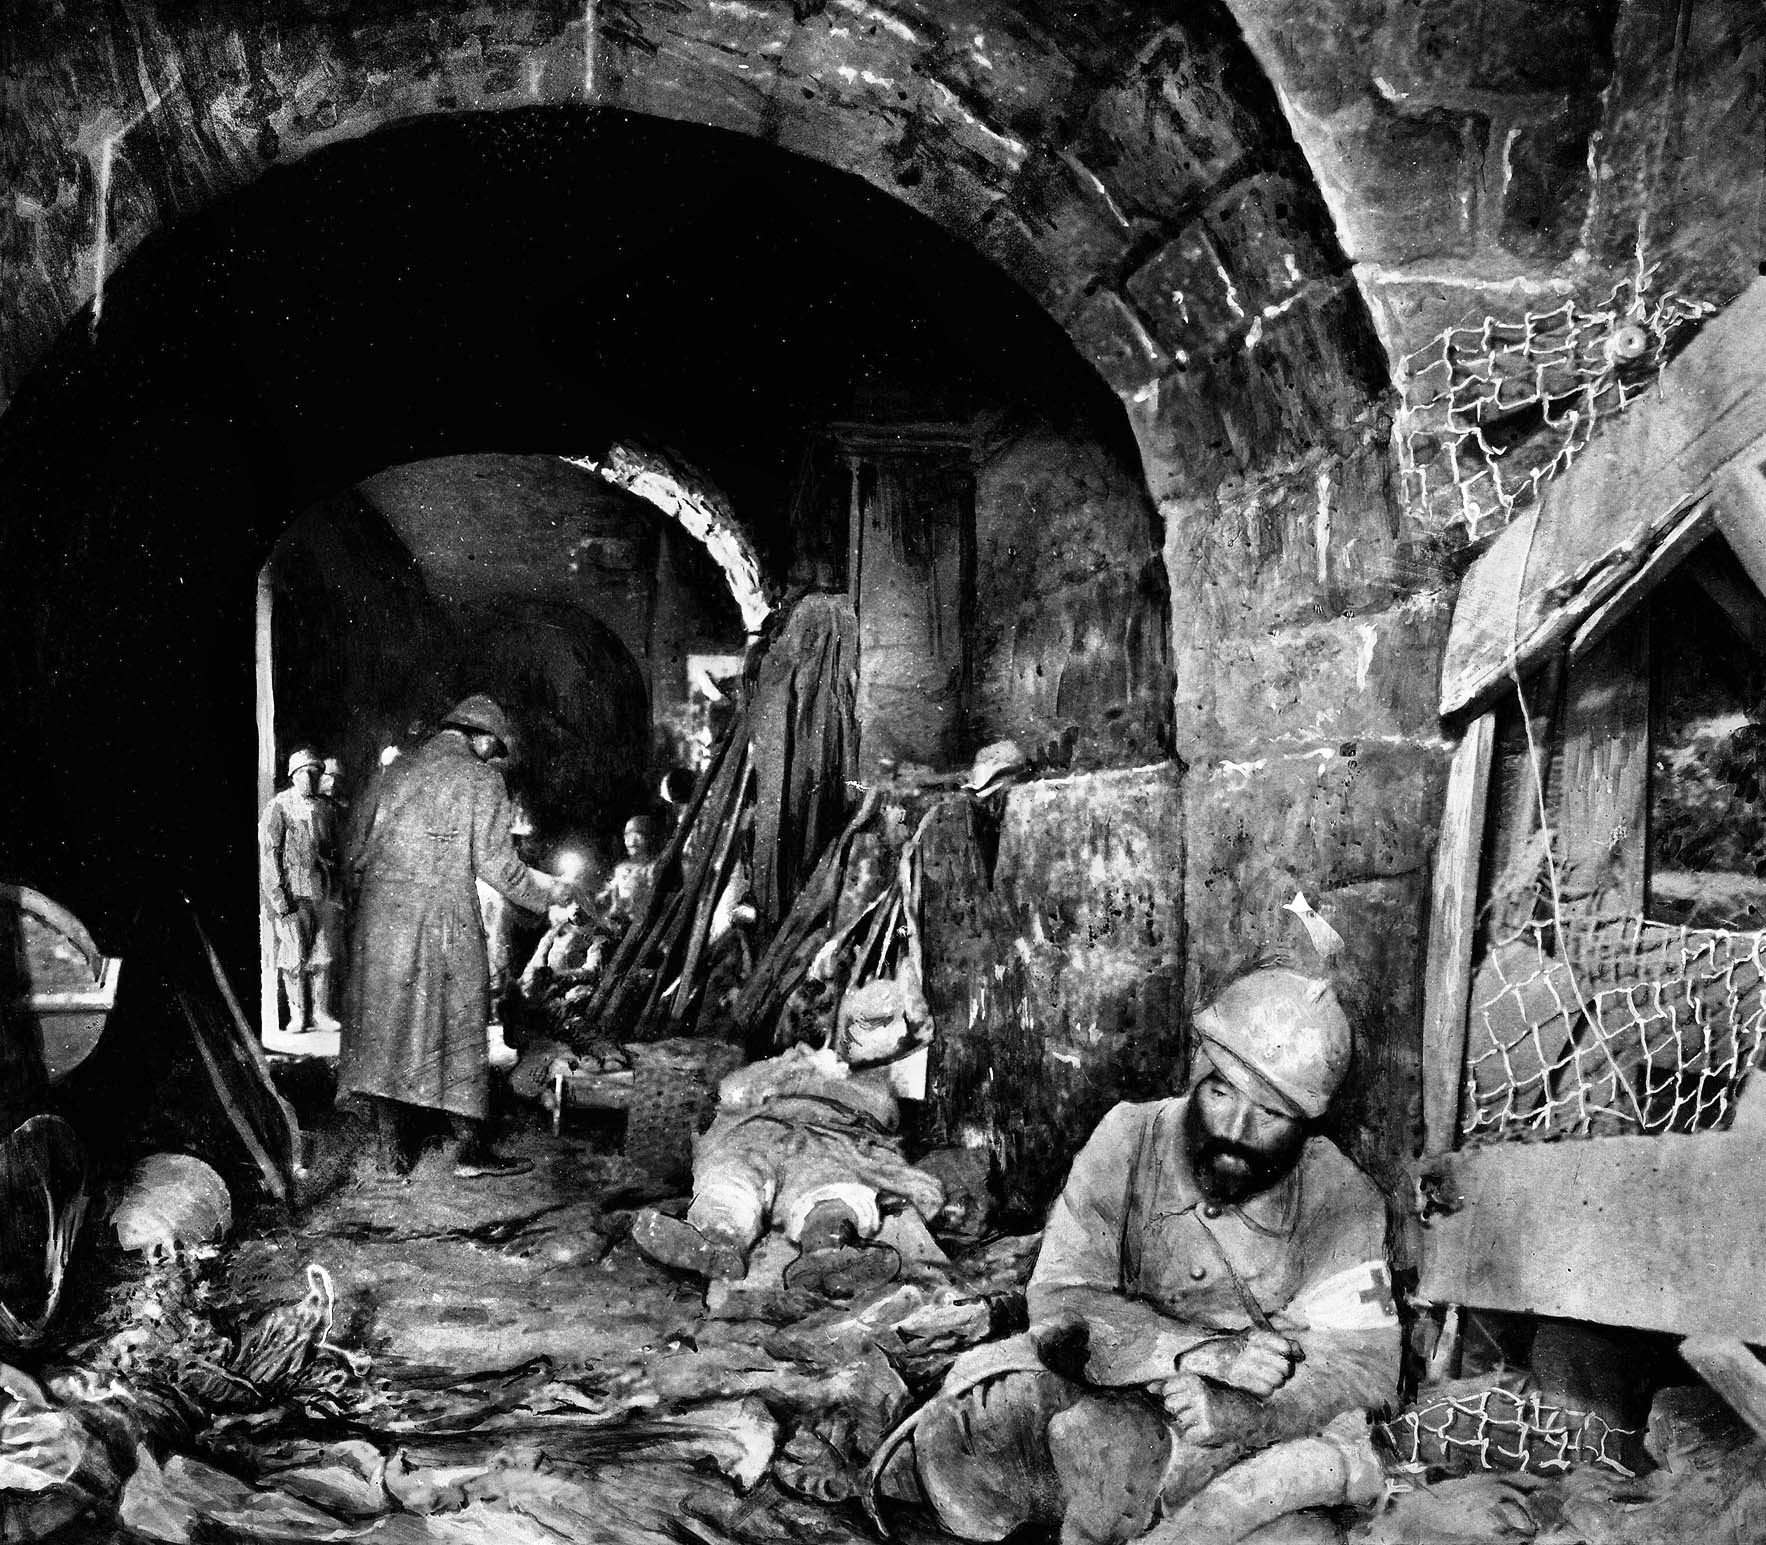 Wounded French soldiers receive treatment inside Fort Vaux. The Germans found life difficult within the fort in the face of relentless shelling by French heavy artillery, and abandoned it on November 1.